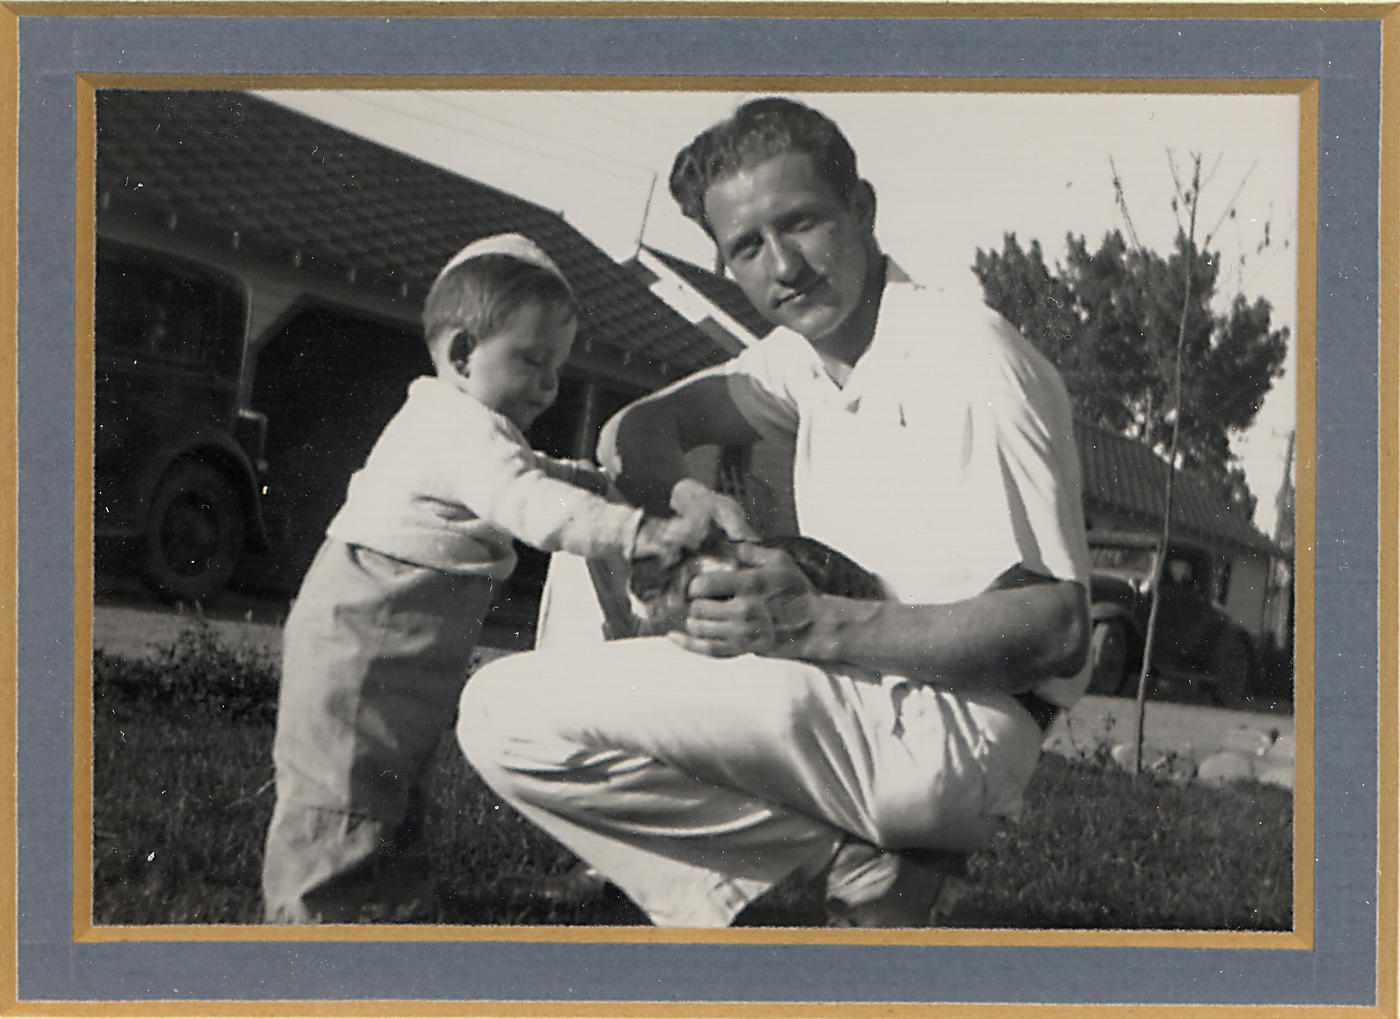 Jan Hall and his dad in 1936